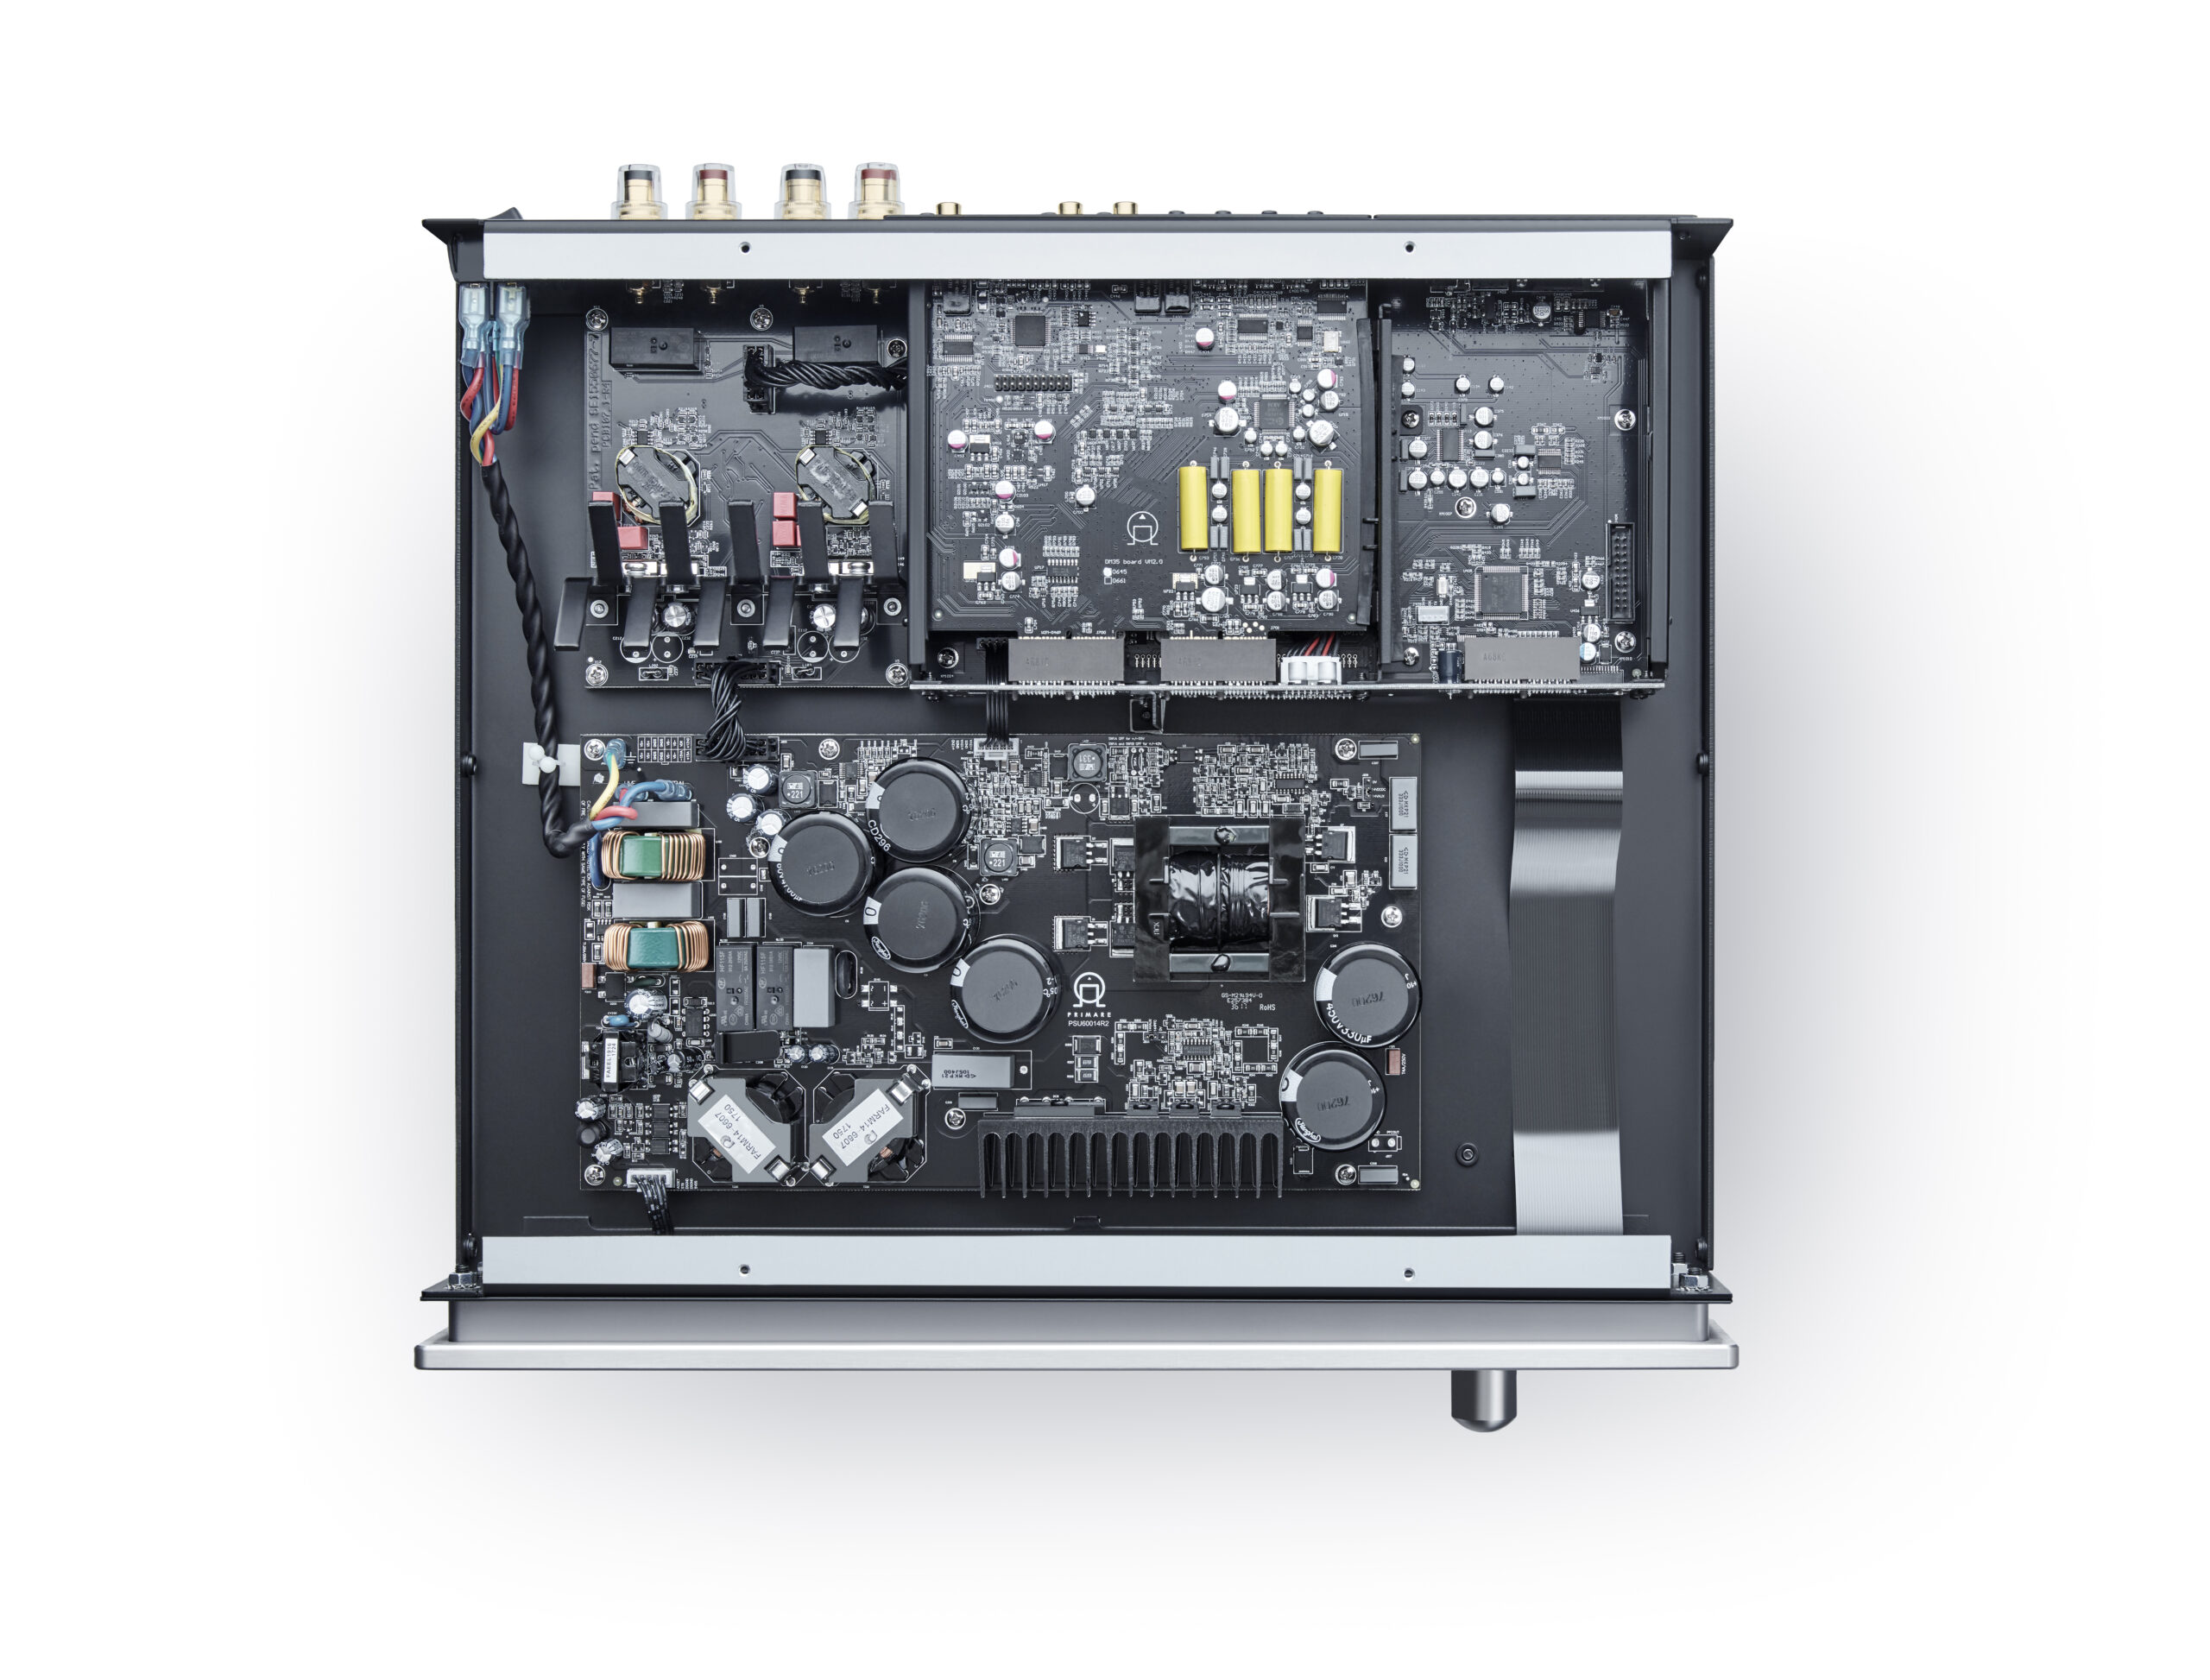 Primare I25 DAC modular integrated amplifier and digital to analog converter technology inside